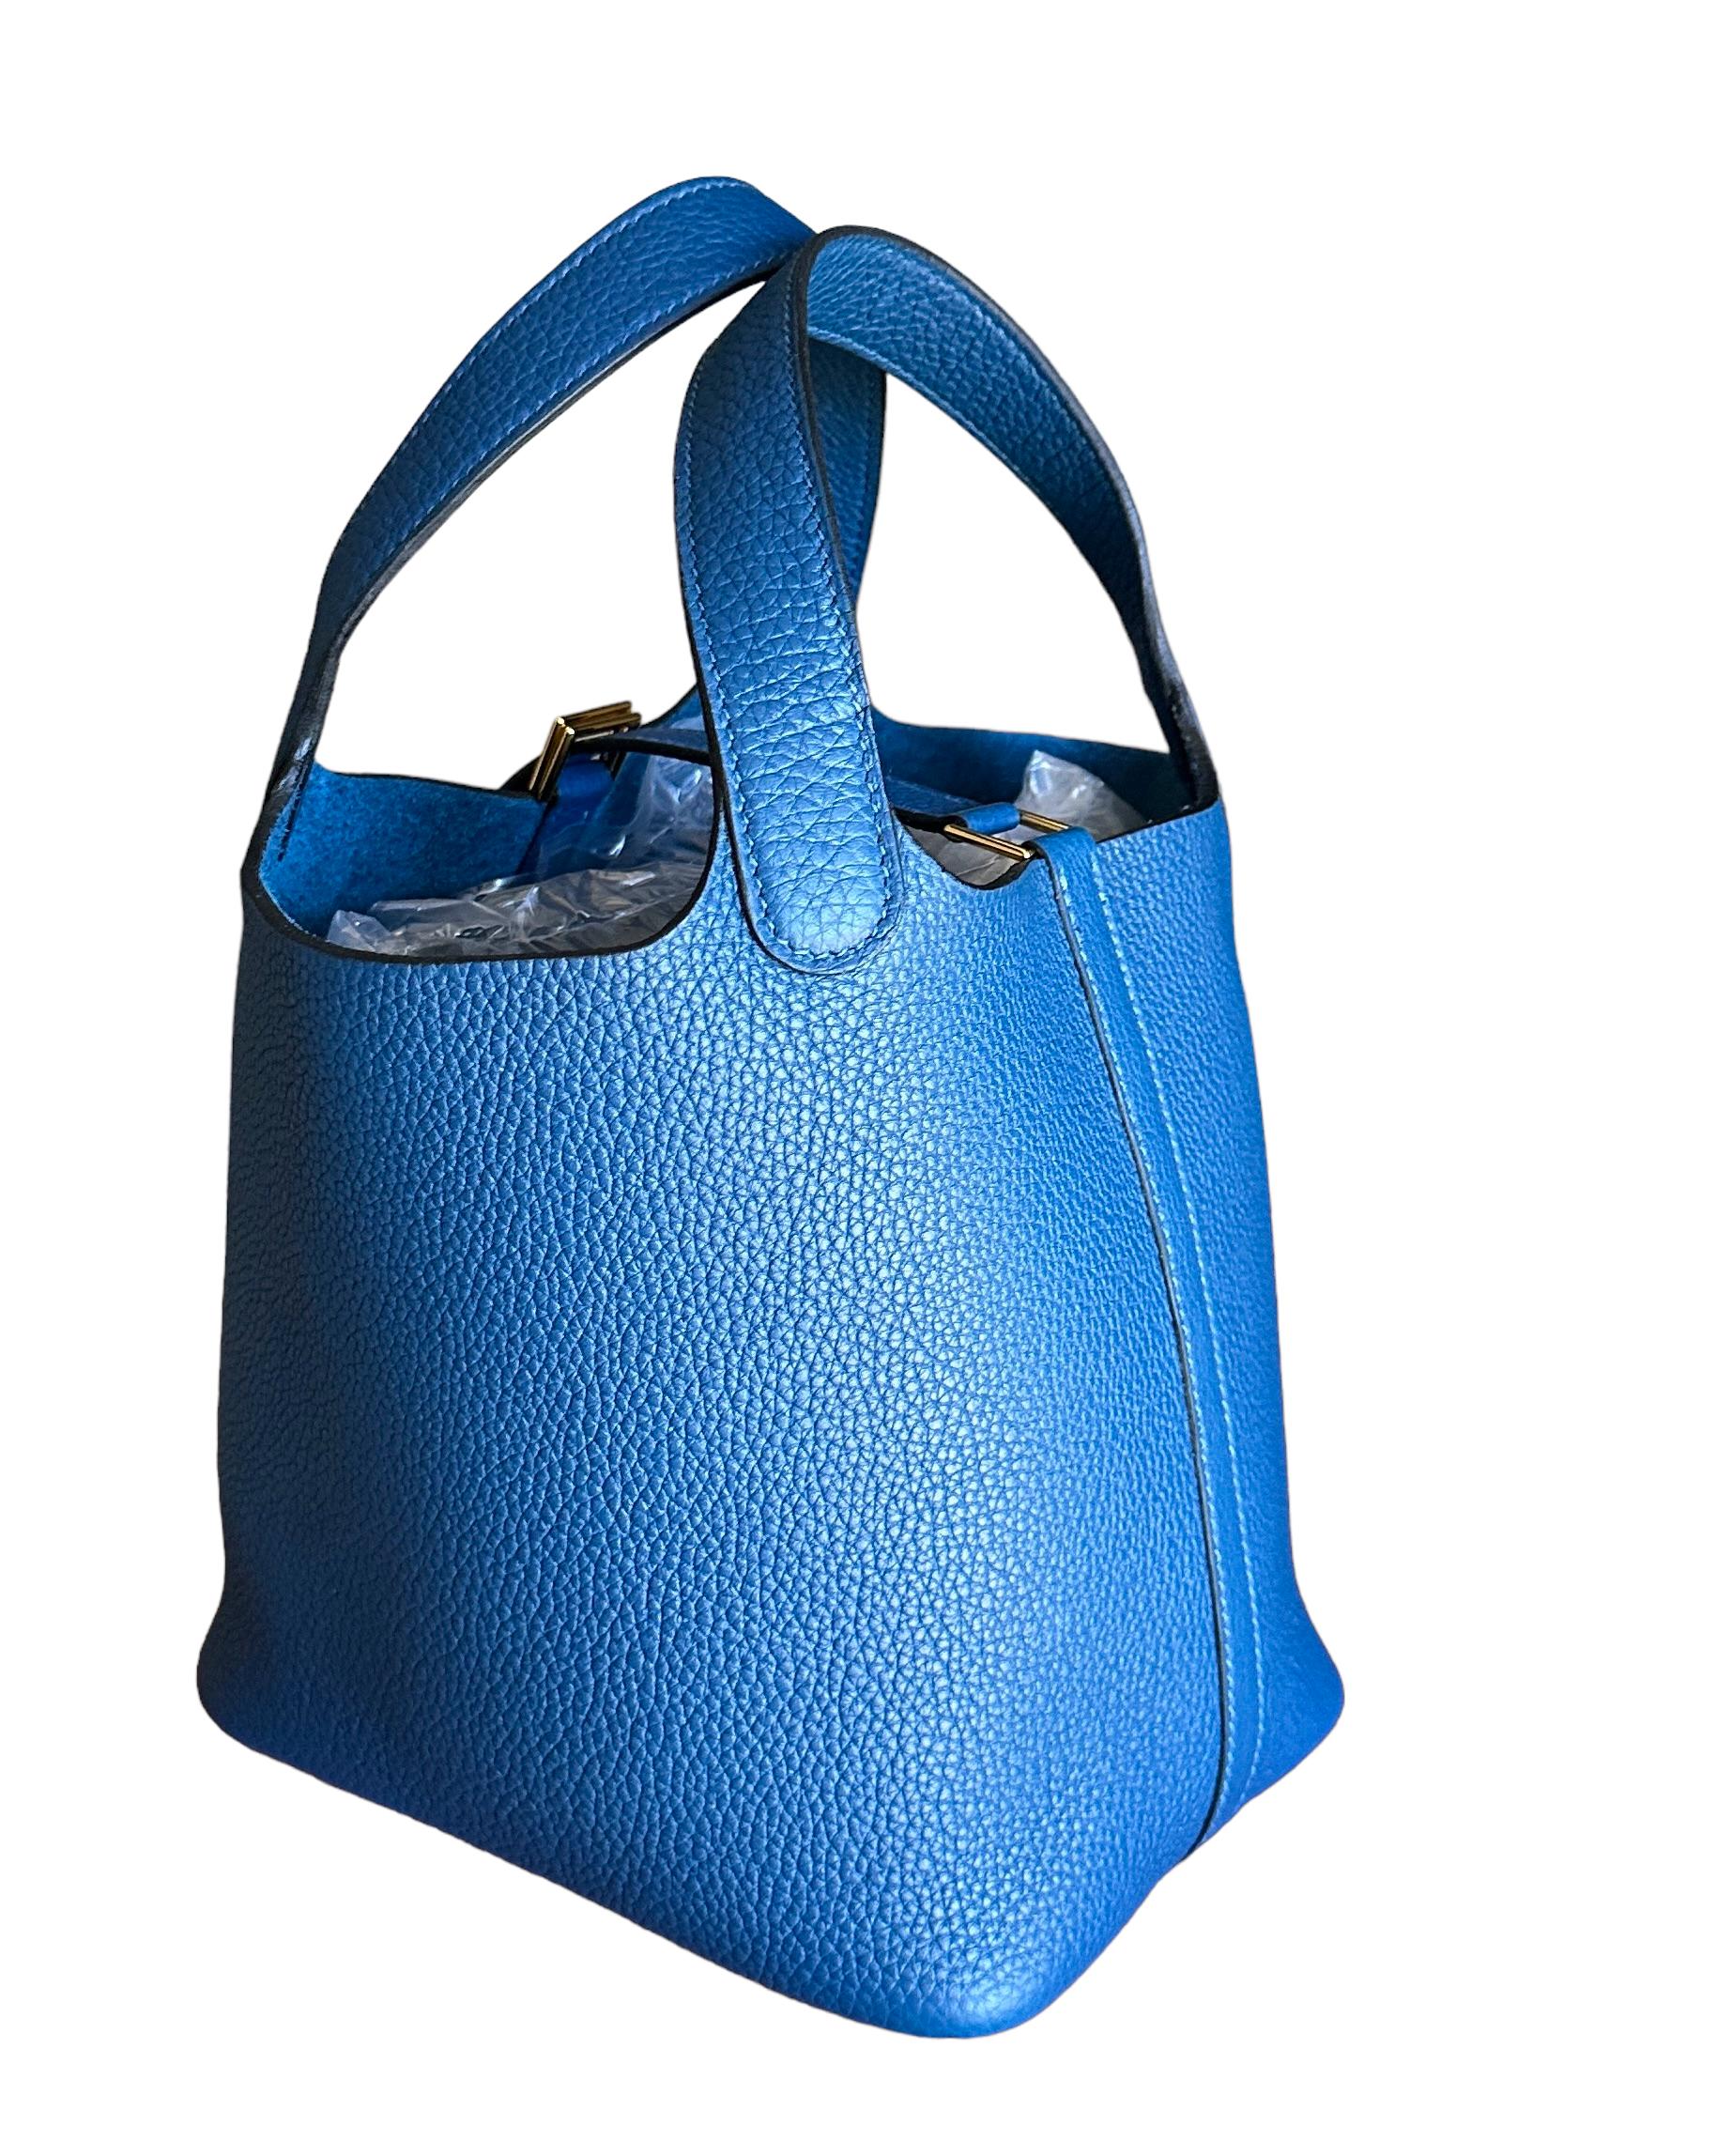 Hermes
Color Deep Blue
Hermes  Picotin Lock 18cm of maurice leather with gold hardware.
Get it while its in stock

This Picotin Lock features tonal stitching with two top handles and a pull through closure on top.

The interior is lined with Deep